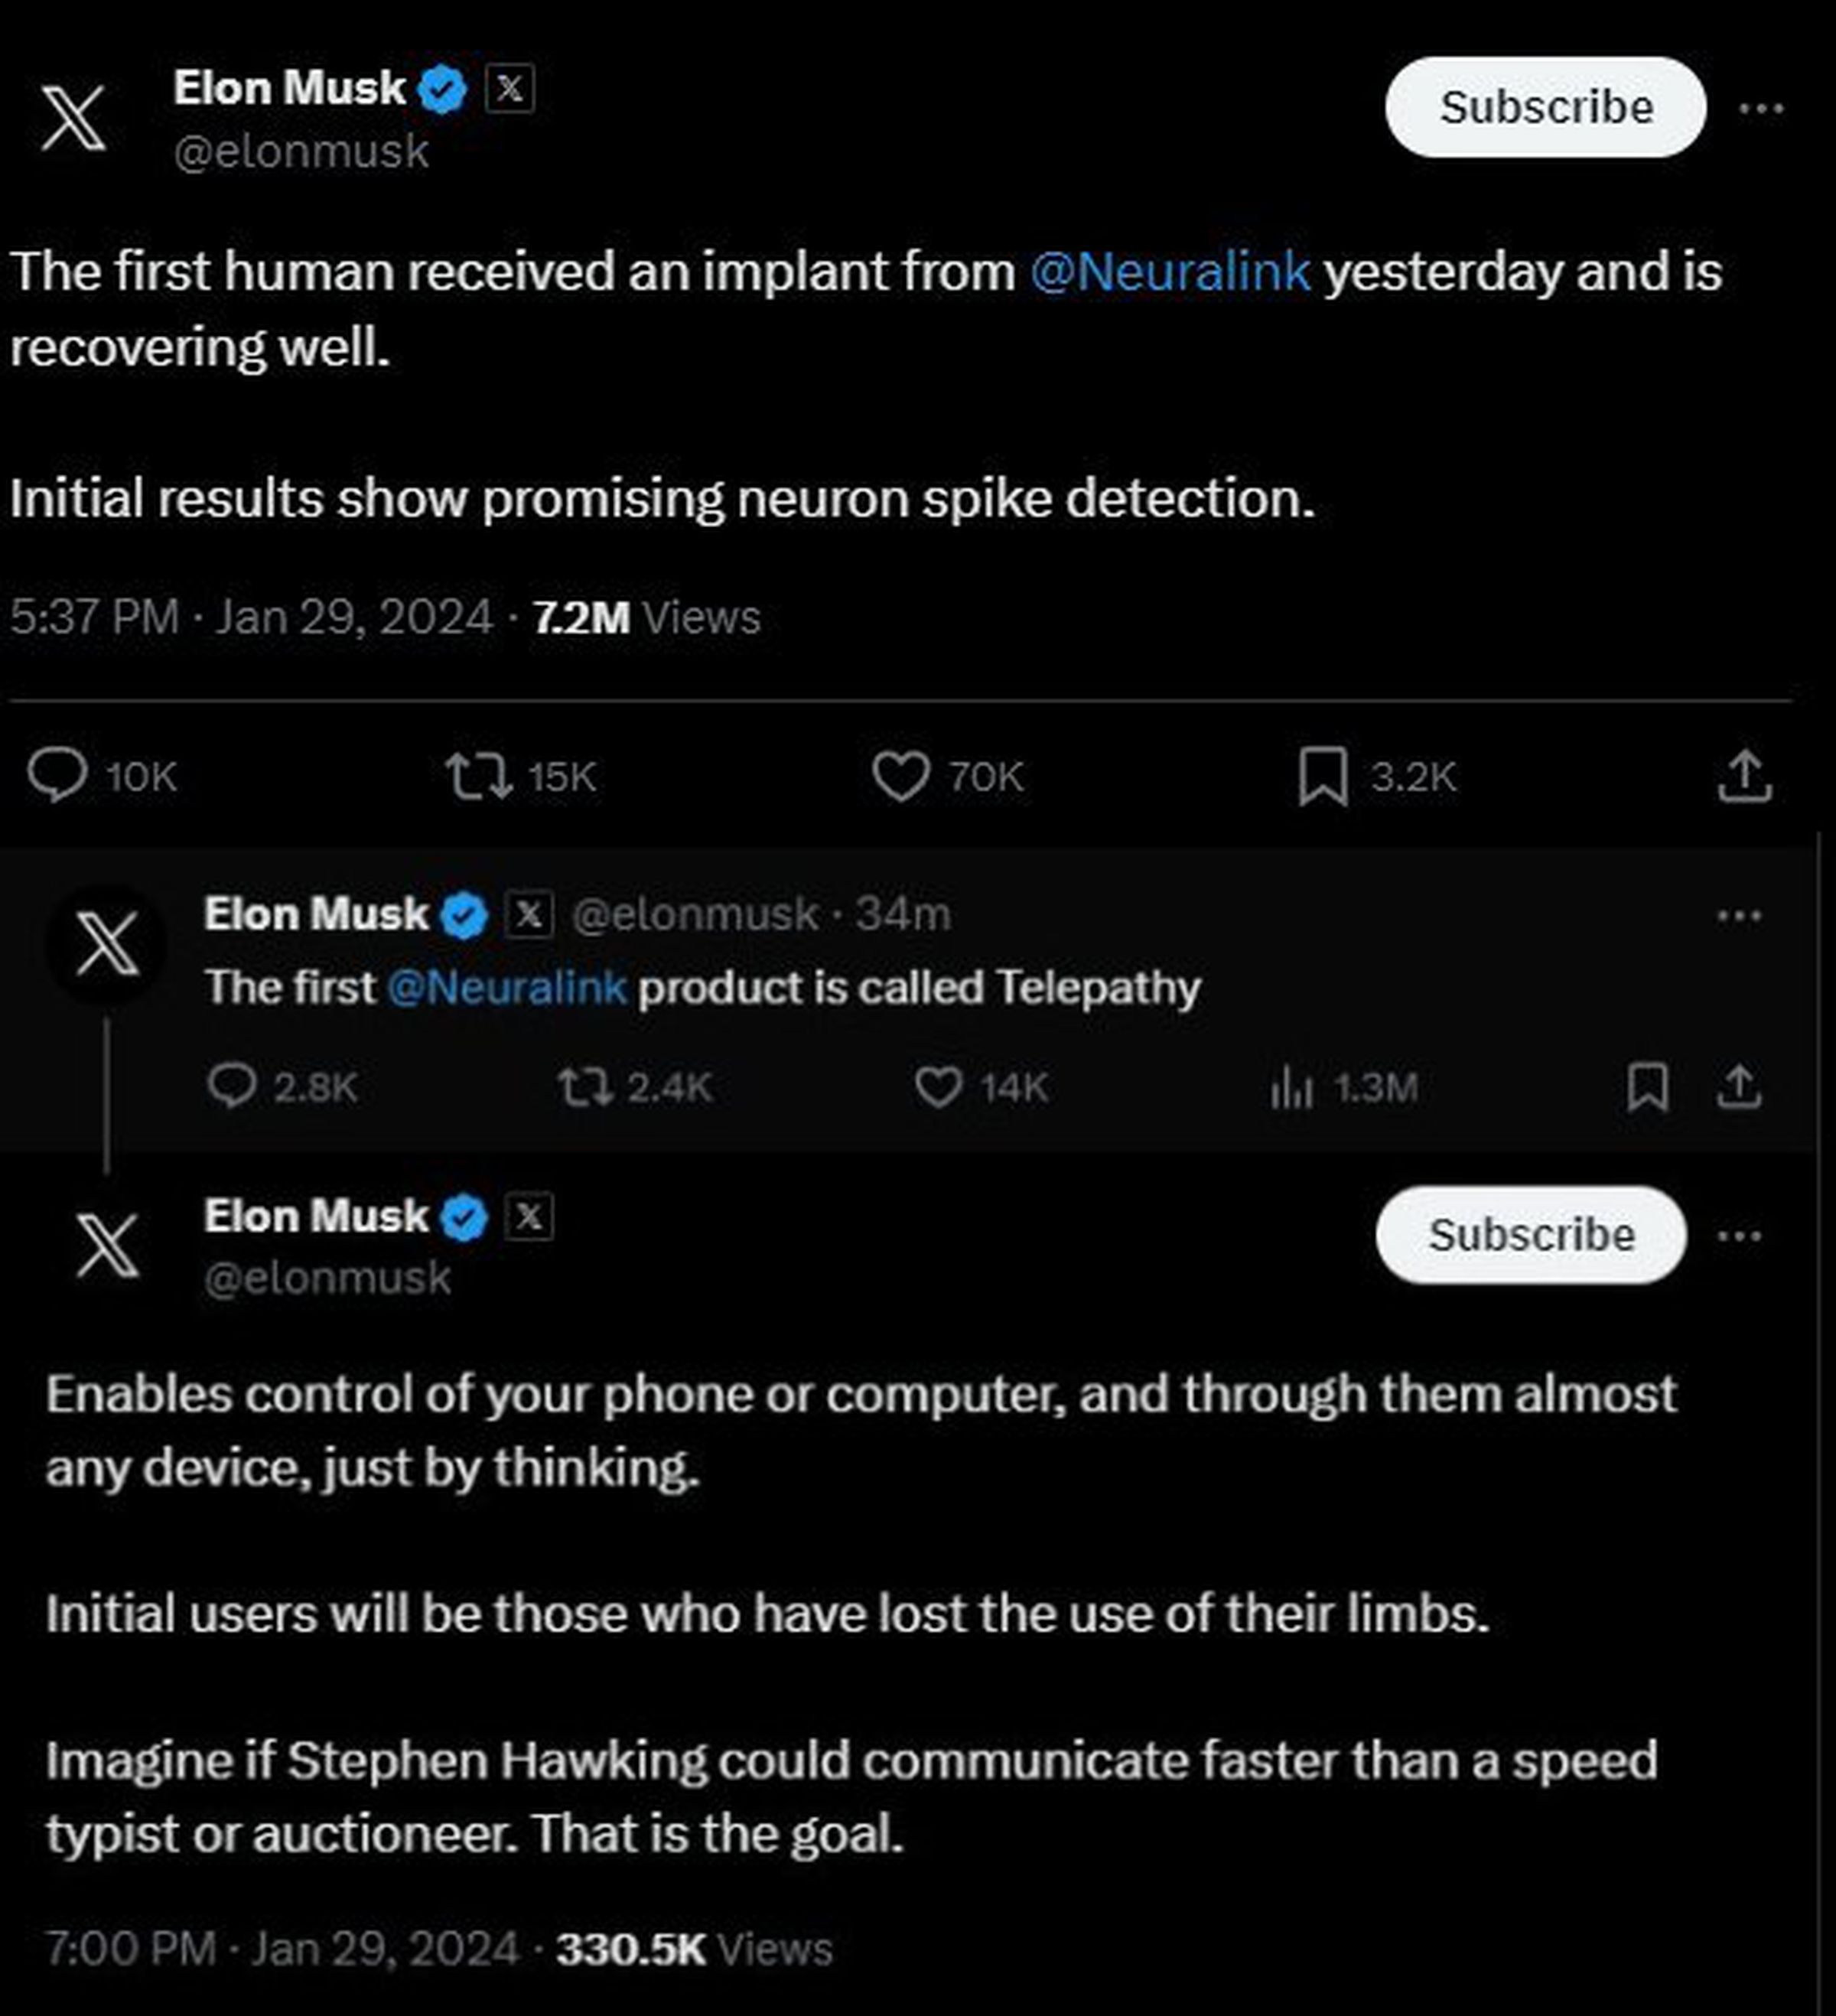 Elon tweets reading: “The first human received an implant from @Neuralink  yesterday and is recovering well.  Initial results show promising neuron spike detection.” “The first @Neuralink  product is called Telepathy.” “Enables control of your phone or computer, and through them almost any device, just by thinking.  Initial users will be those who have lost the use of their limbs.   Imagine if Stephen Hawking could communicate faster than a speed typist or auctioneer. That is the goal.”